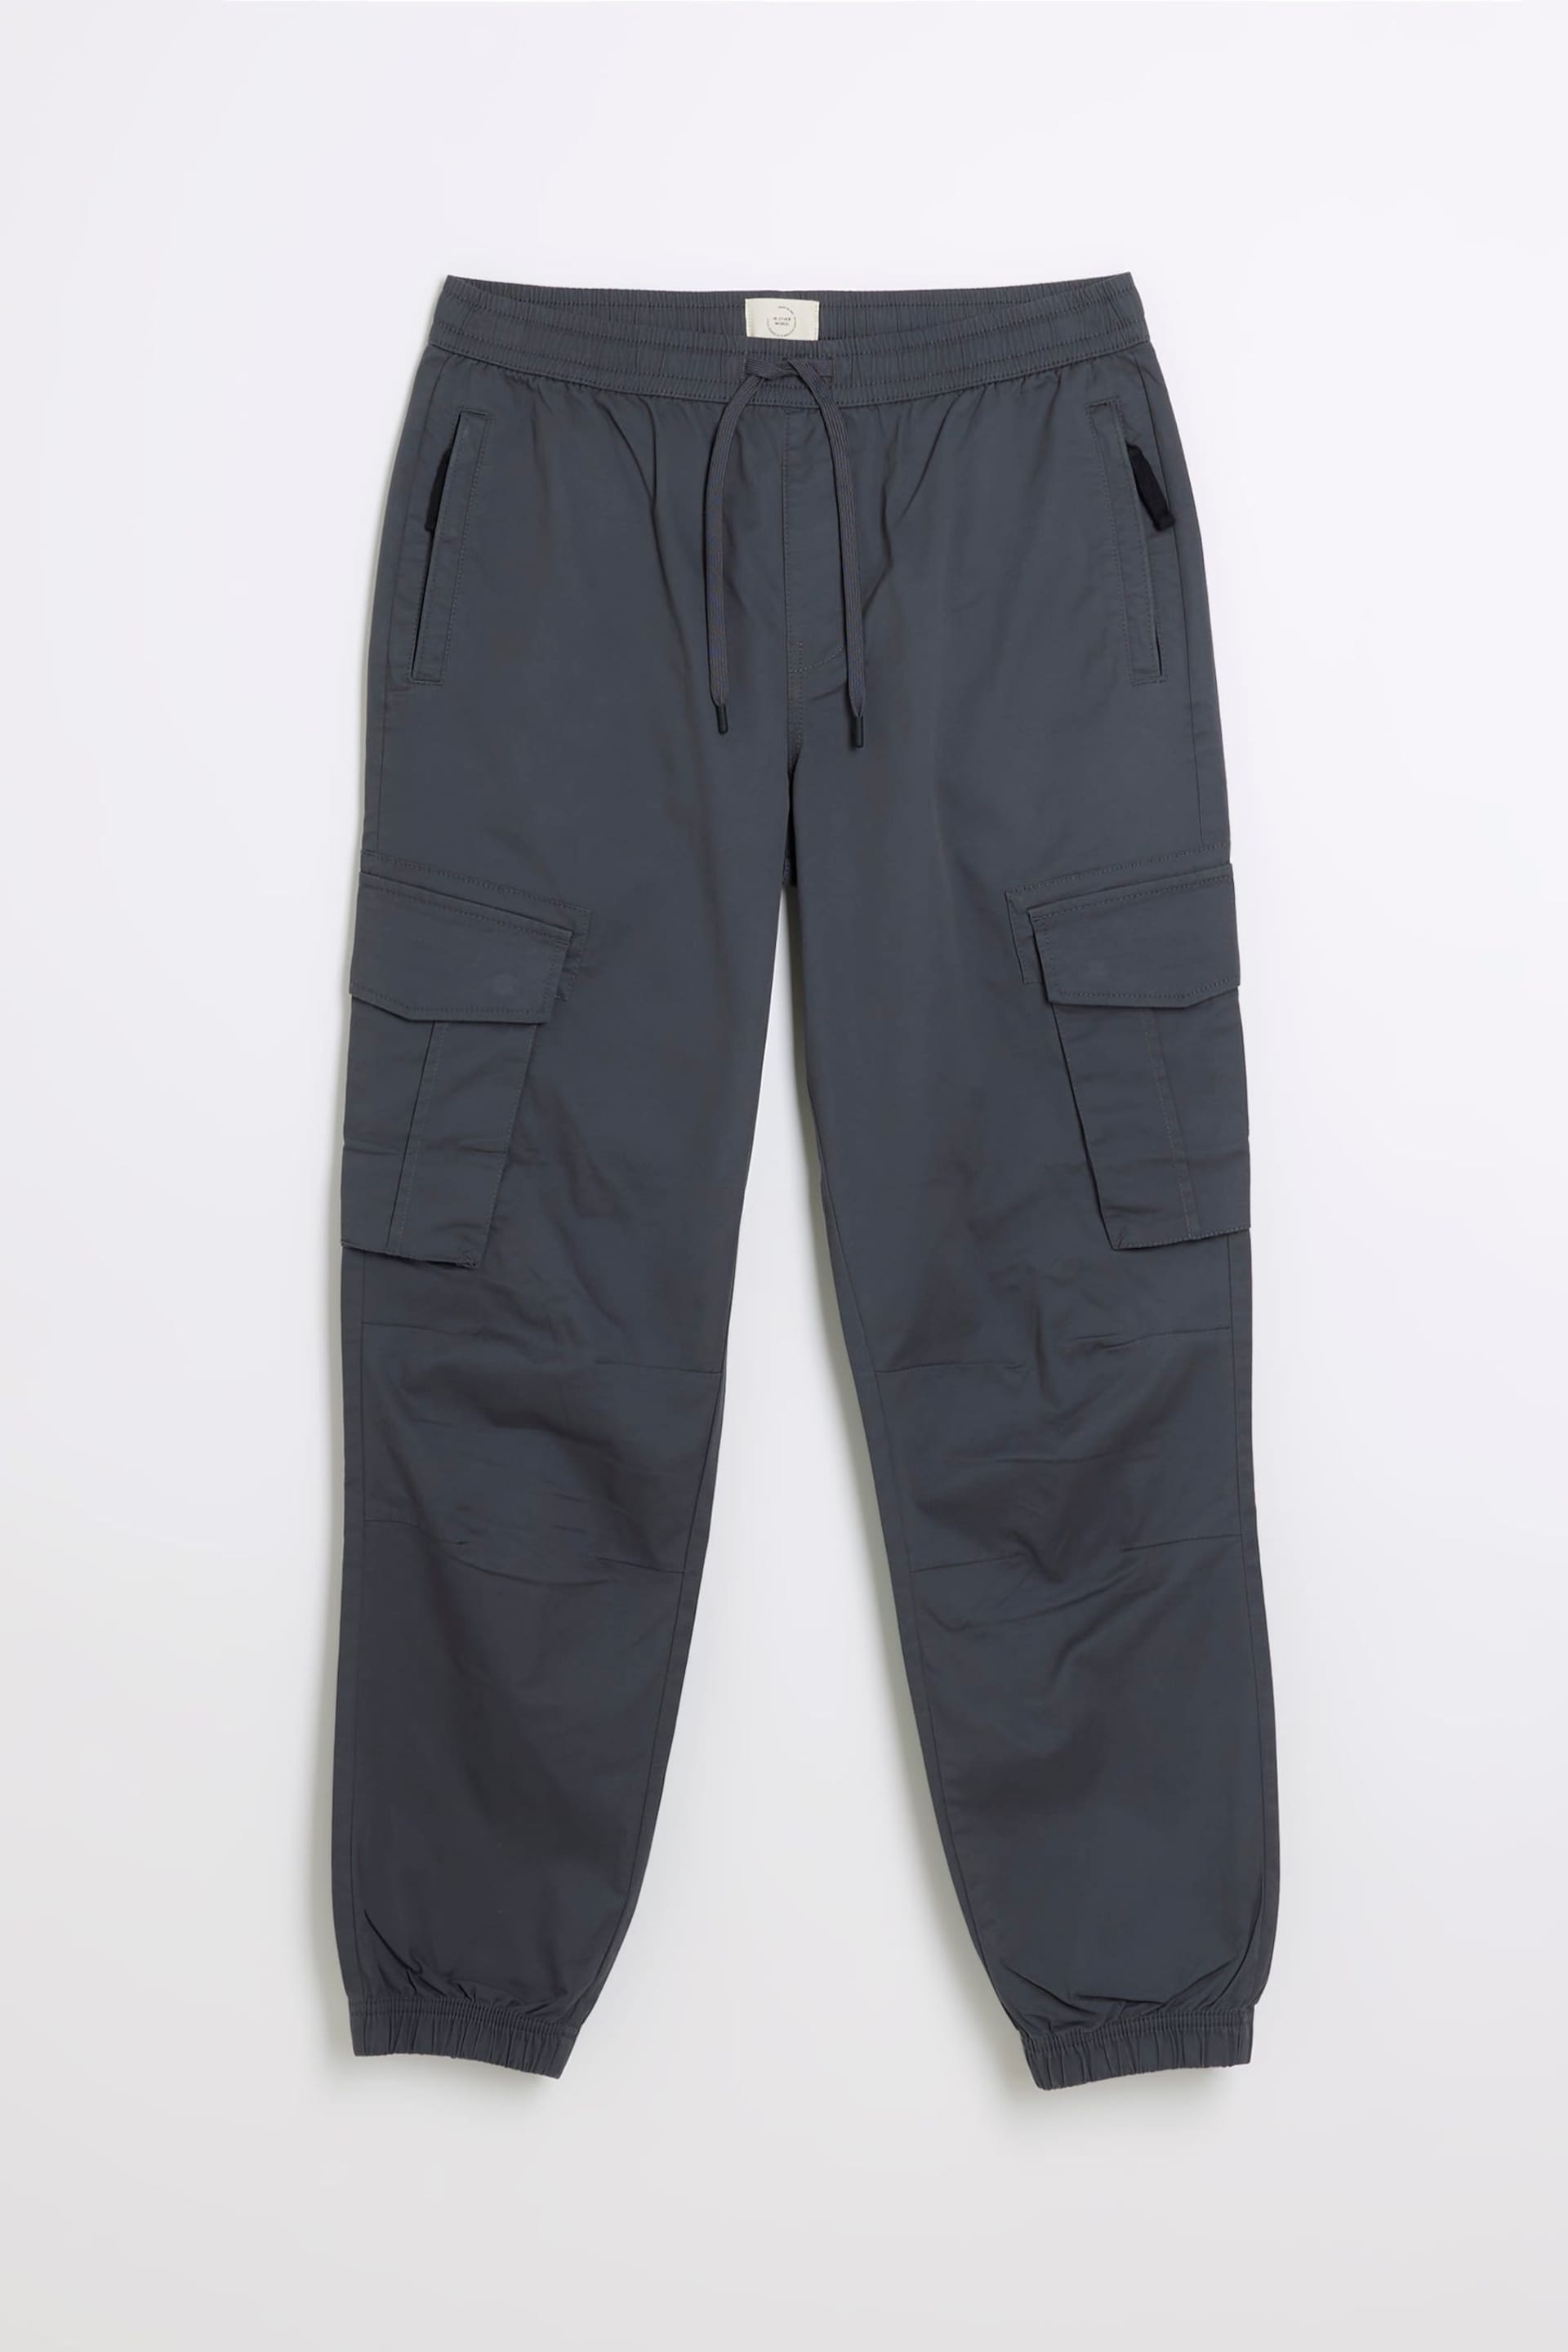 River Island Grey Washed Cargo Joggers - Image 4 of 4